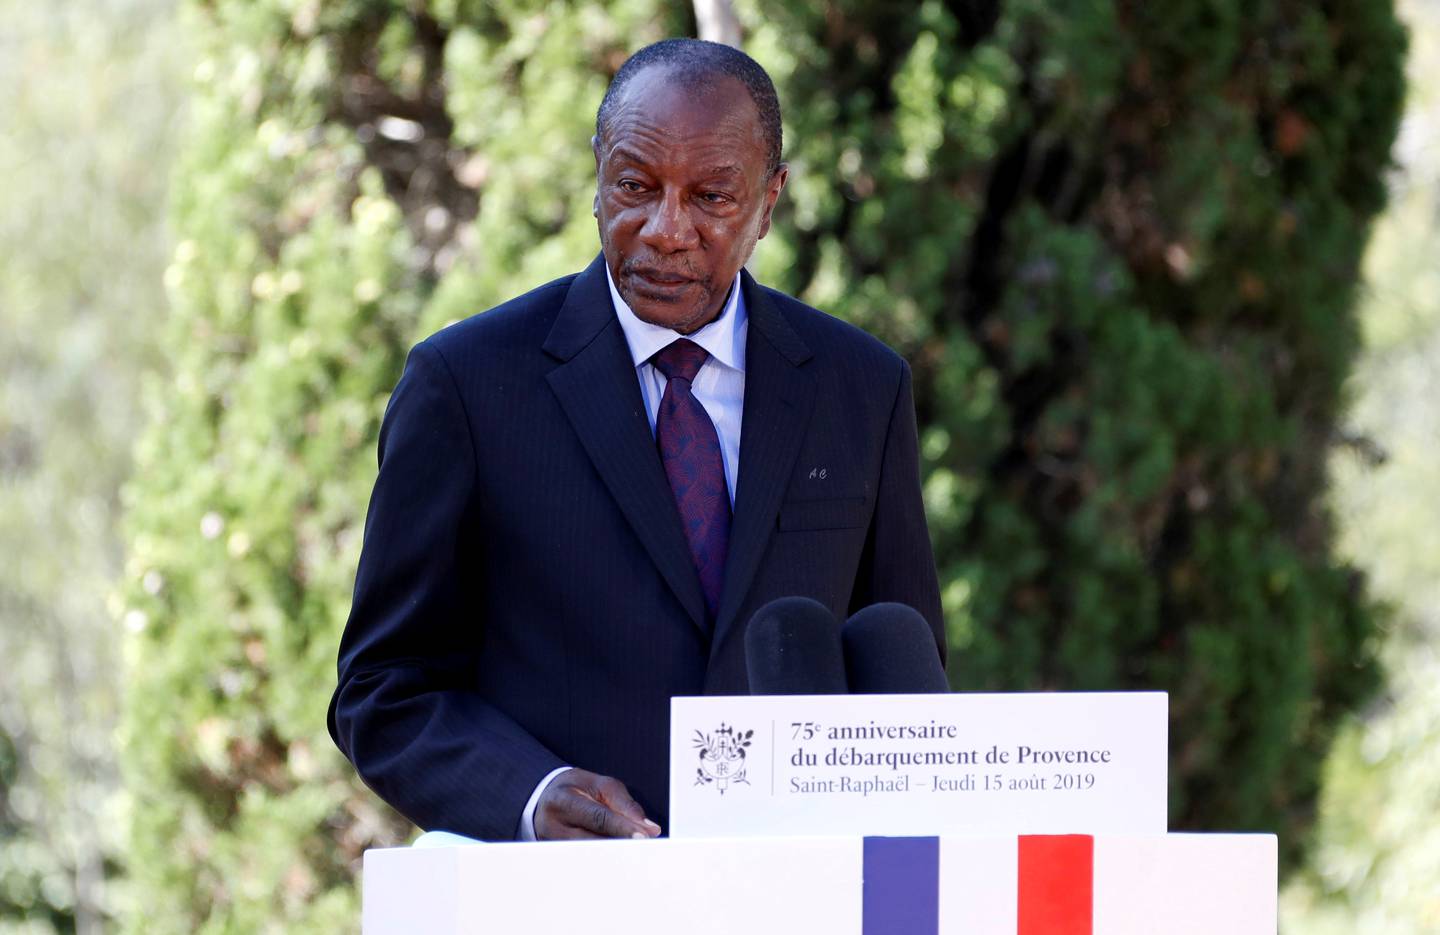 Guinean President Alpha Conde delivers a speech in Boulouris, France, on August 15, 2019 during a ceremony marking the 75th anniversary of the Allied landings in Provence in the Second World War. Reuters